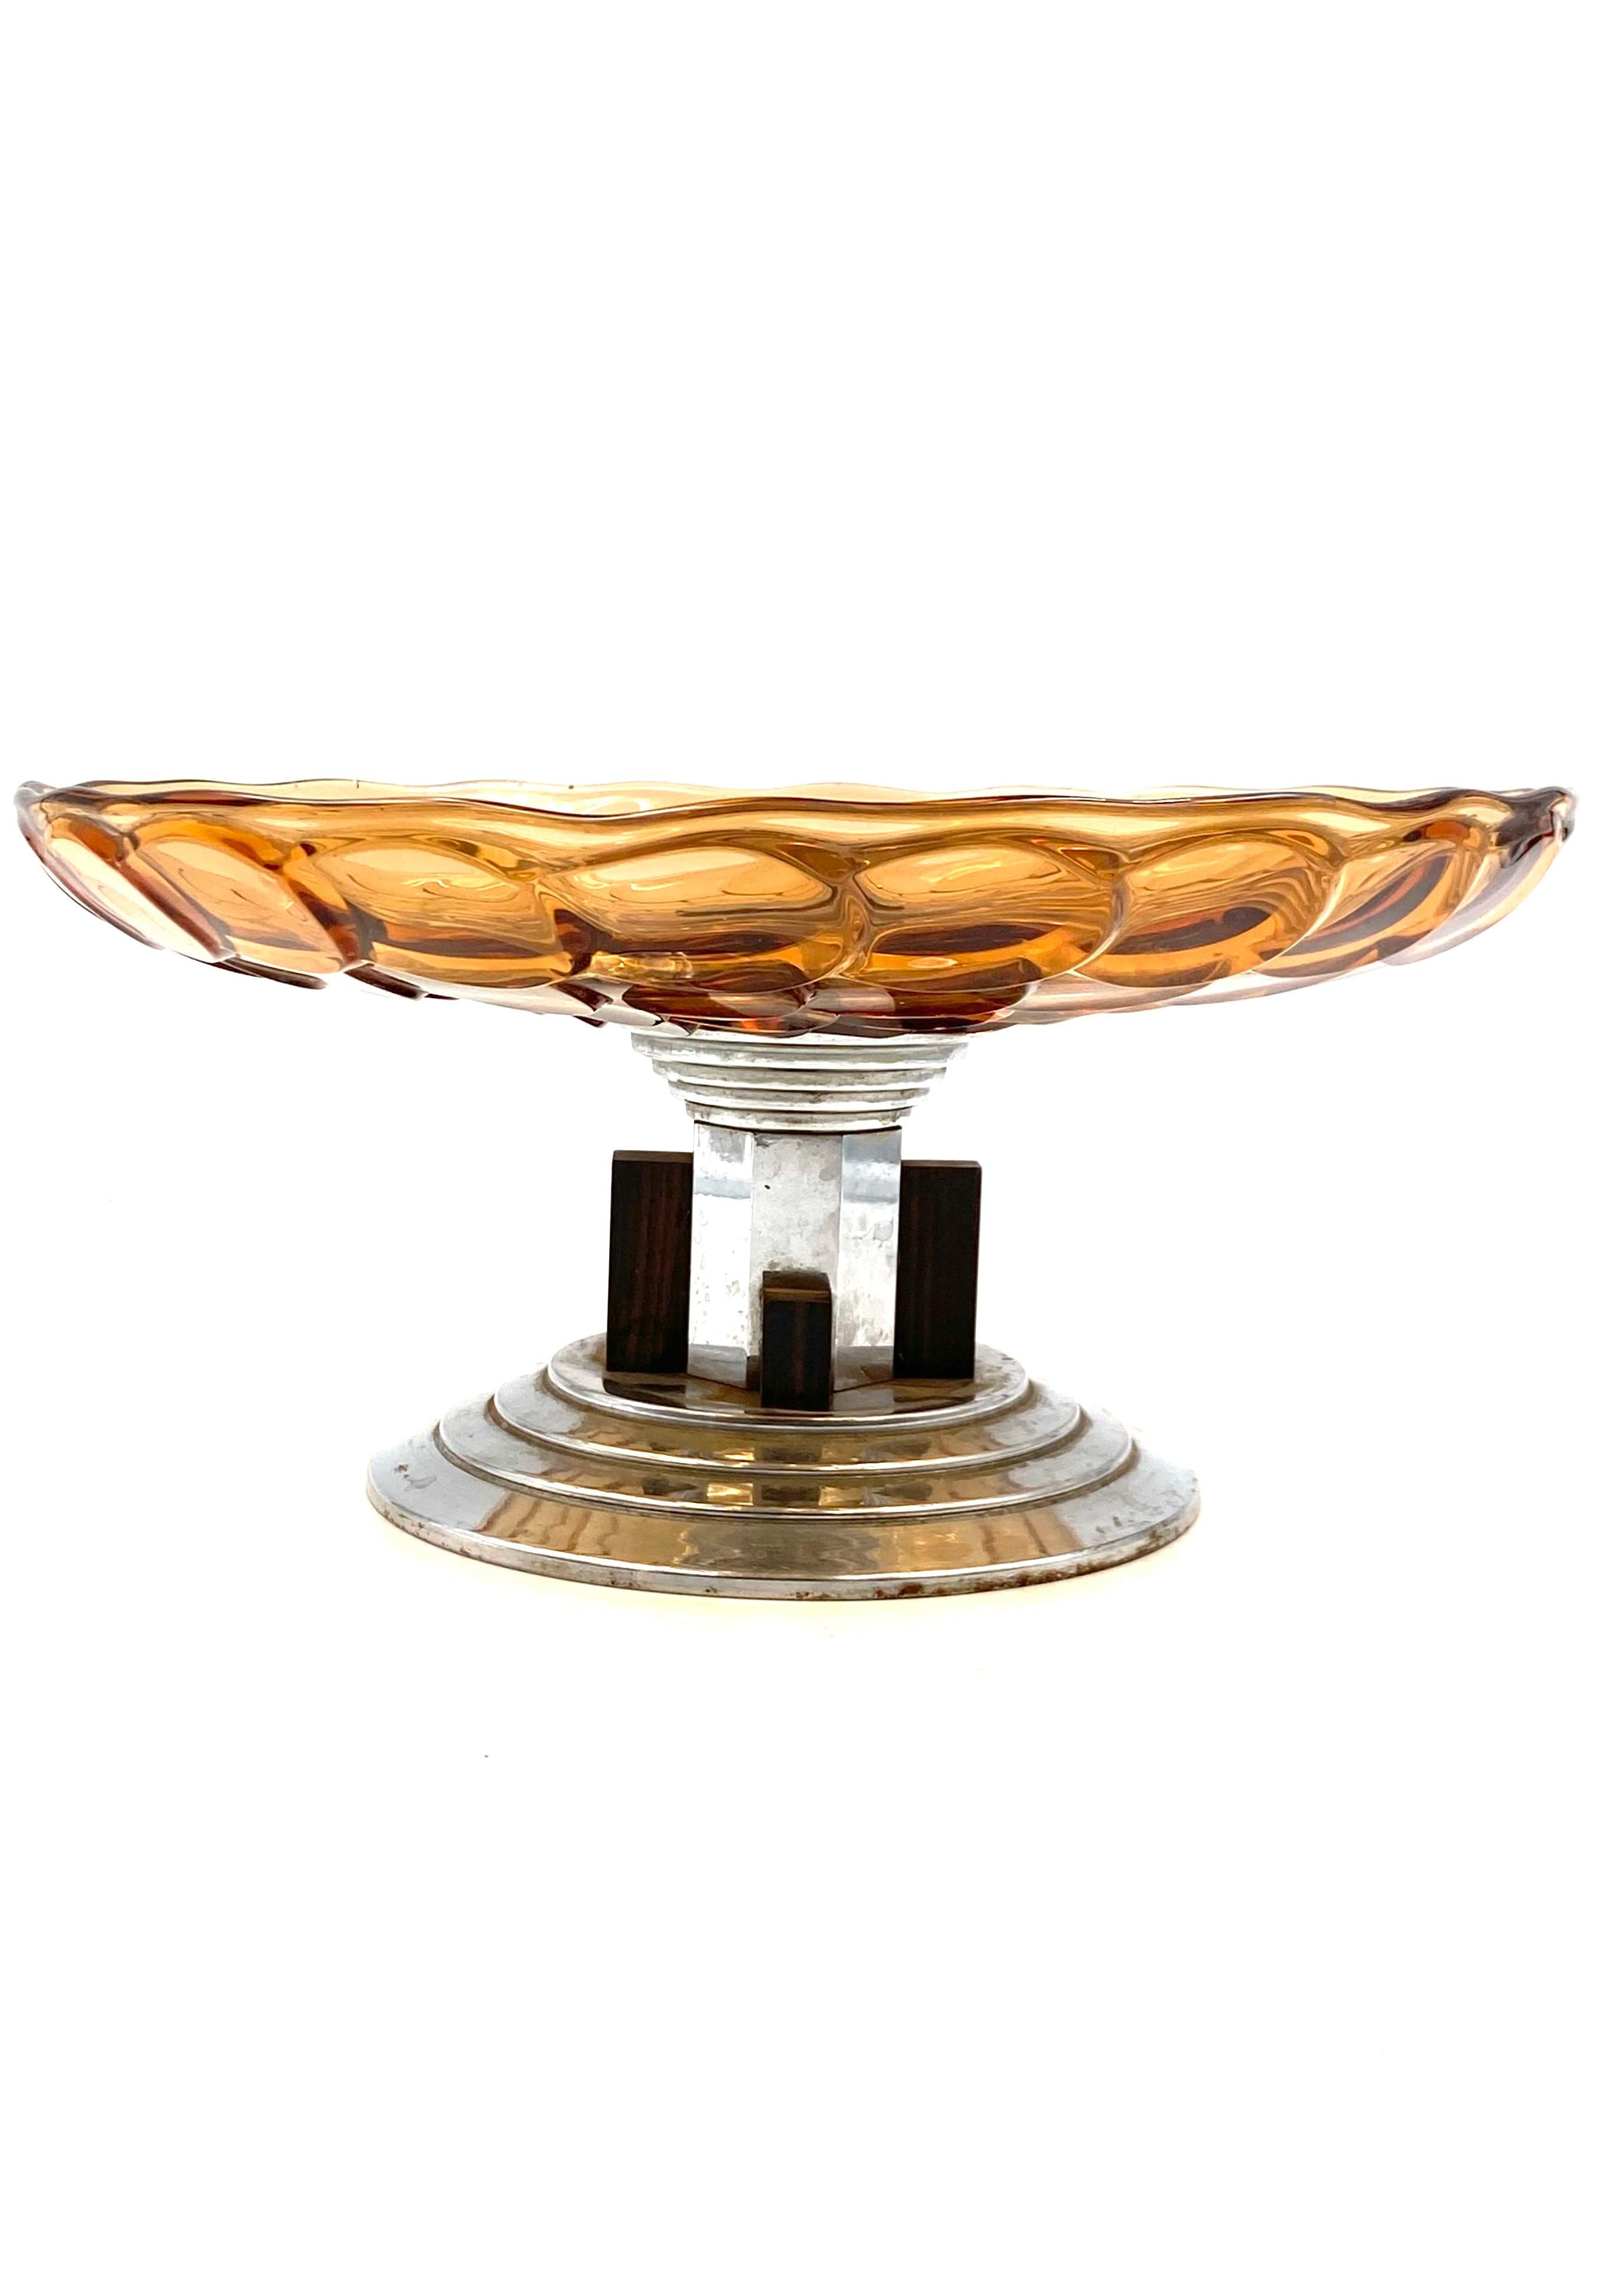 Art Deco orange scaled centerpiece / bowl

France 1930- 1940

glass, wood, stone

measures: 14.5 cm height x 32 cm diameter.

Conditions: Excellent consistent with age and use.